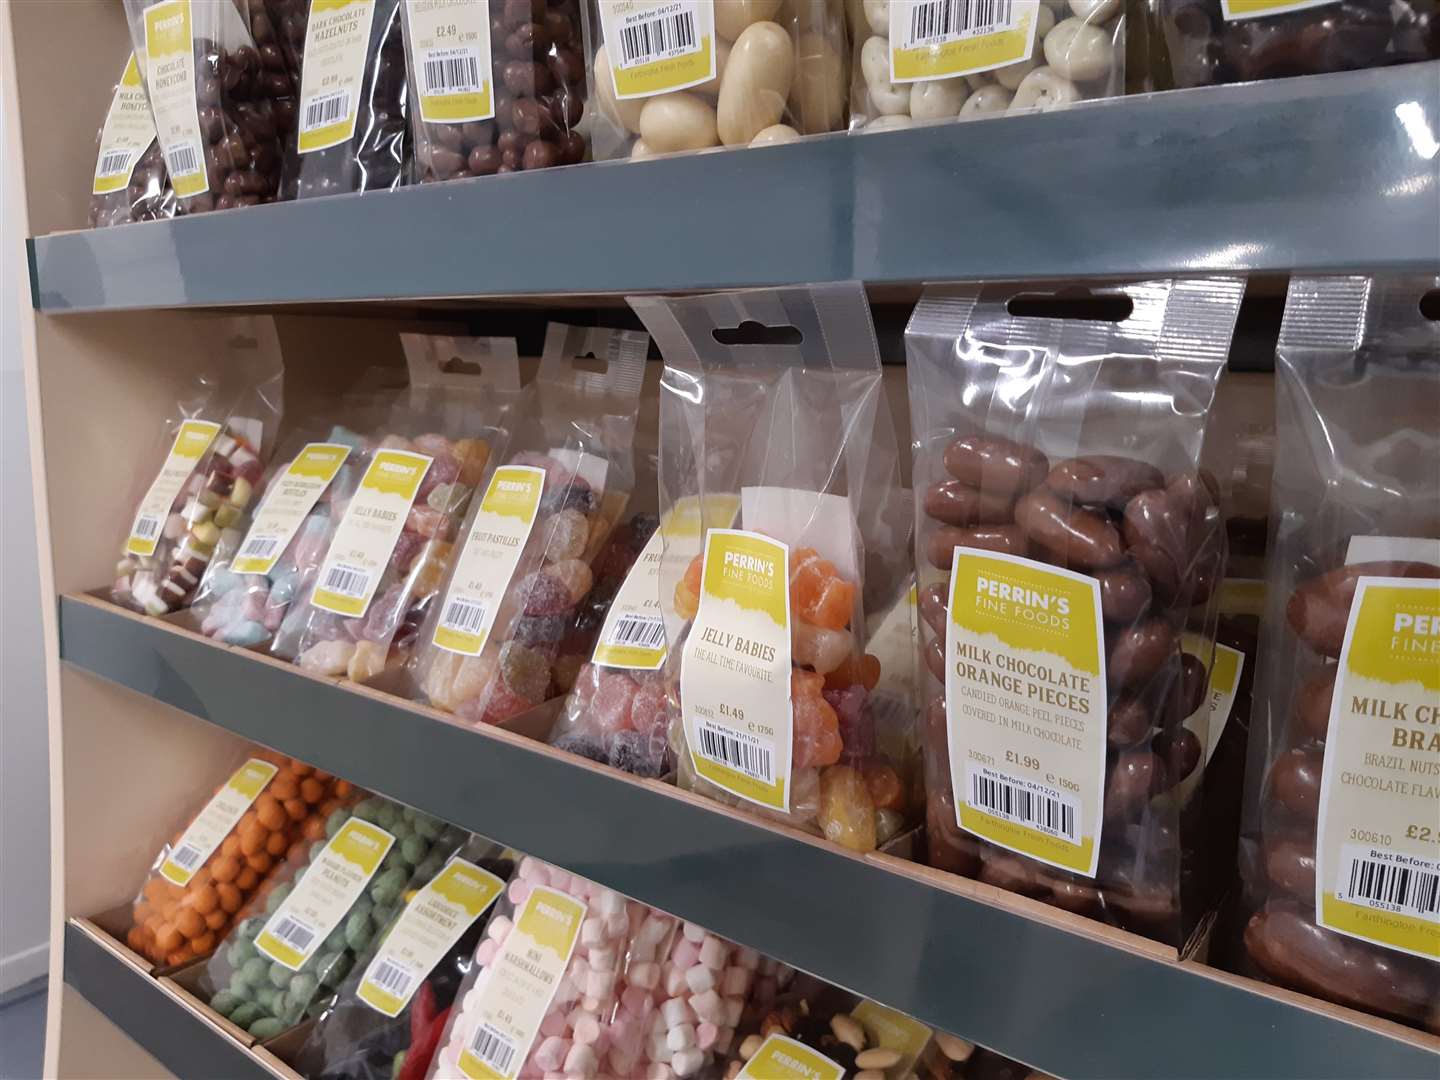 Sweets are on sale alongside the fruit and vegetables